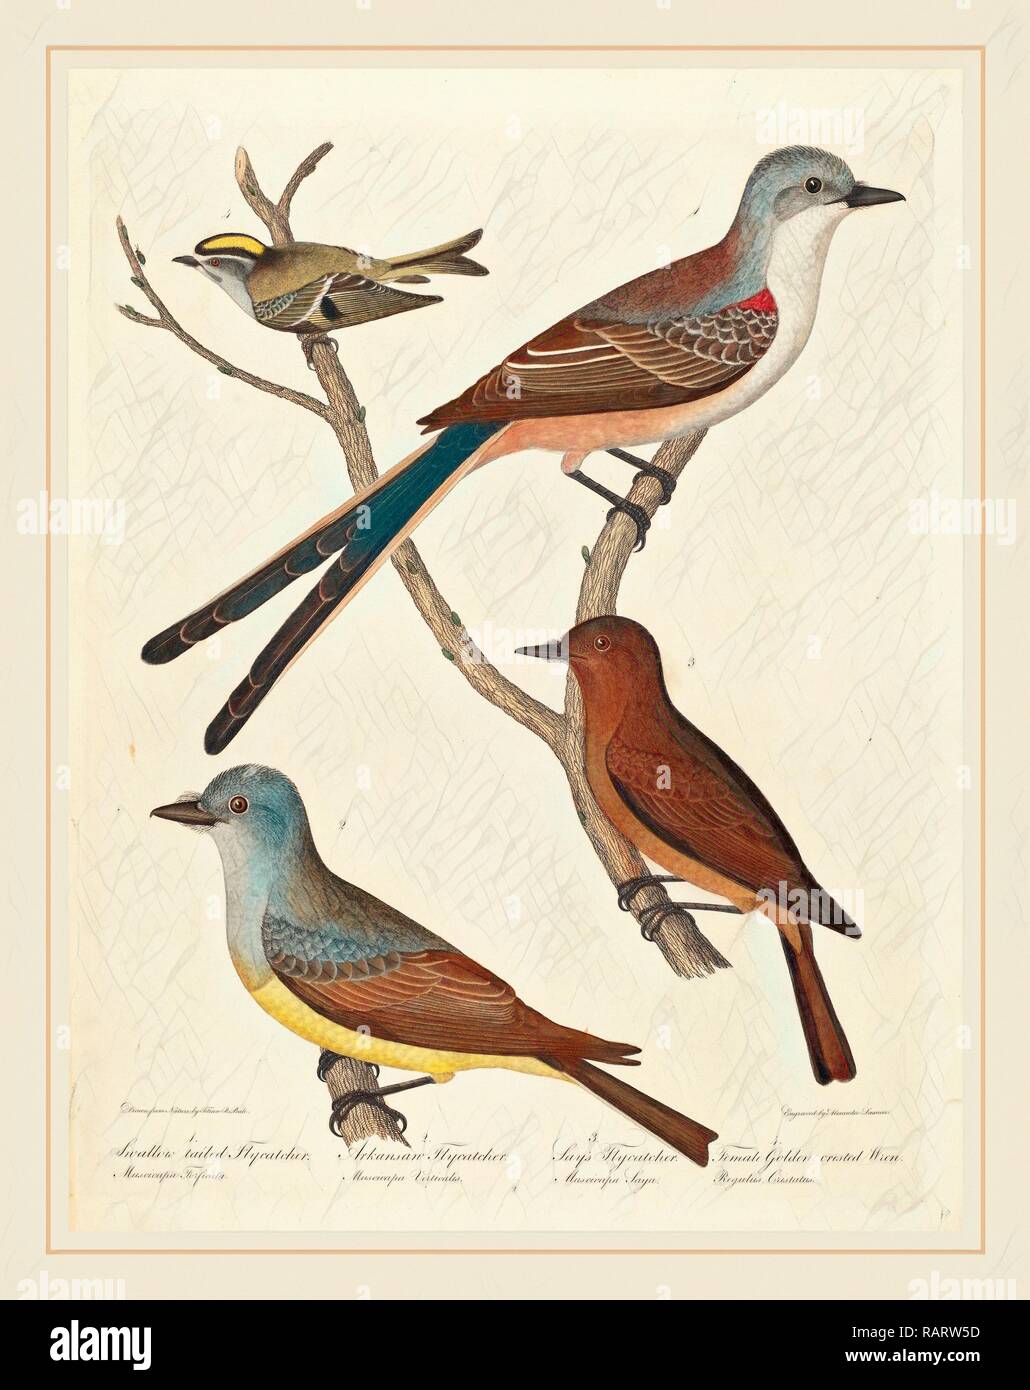 Alexander Lawson after Titian Ramsay Peale, Swallow-tailed Flycatcher, Arkansas Flycatcher, Say's Flycatcher, and reimagined Stock Photo